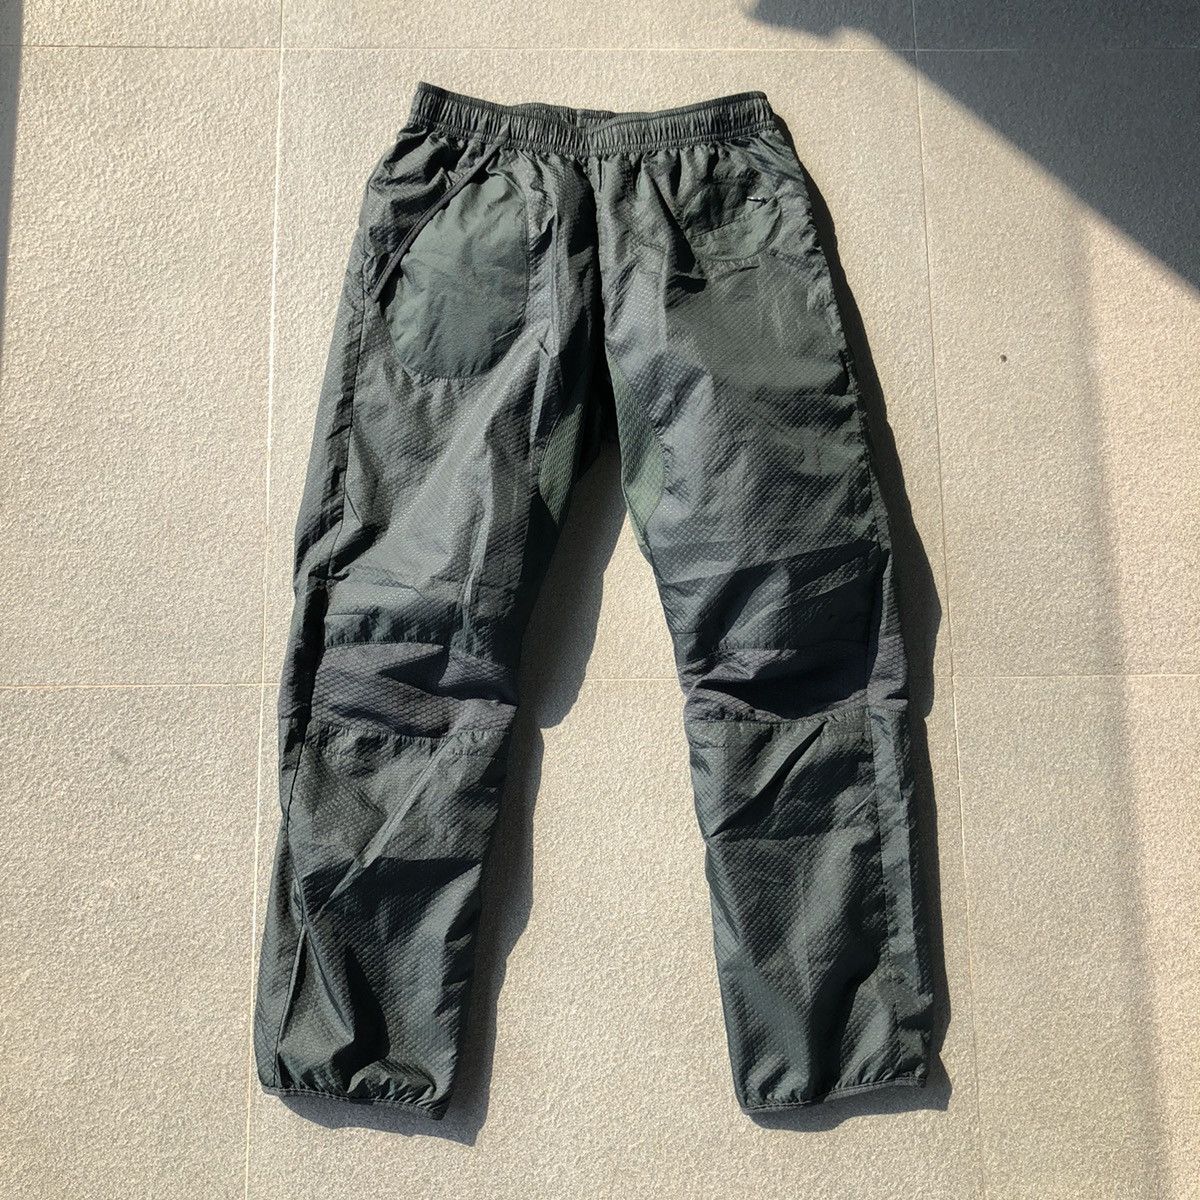 Undercover nike gyakusou undercover ss14 trackpants | Grailed